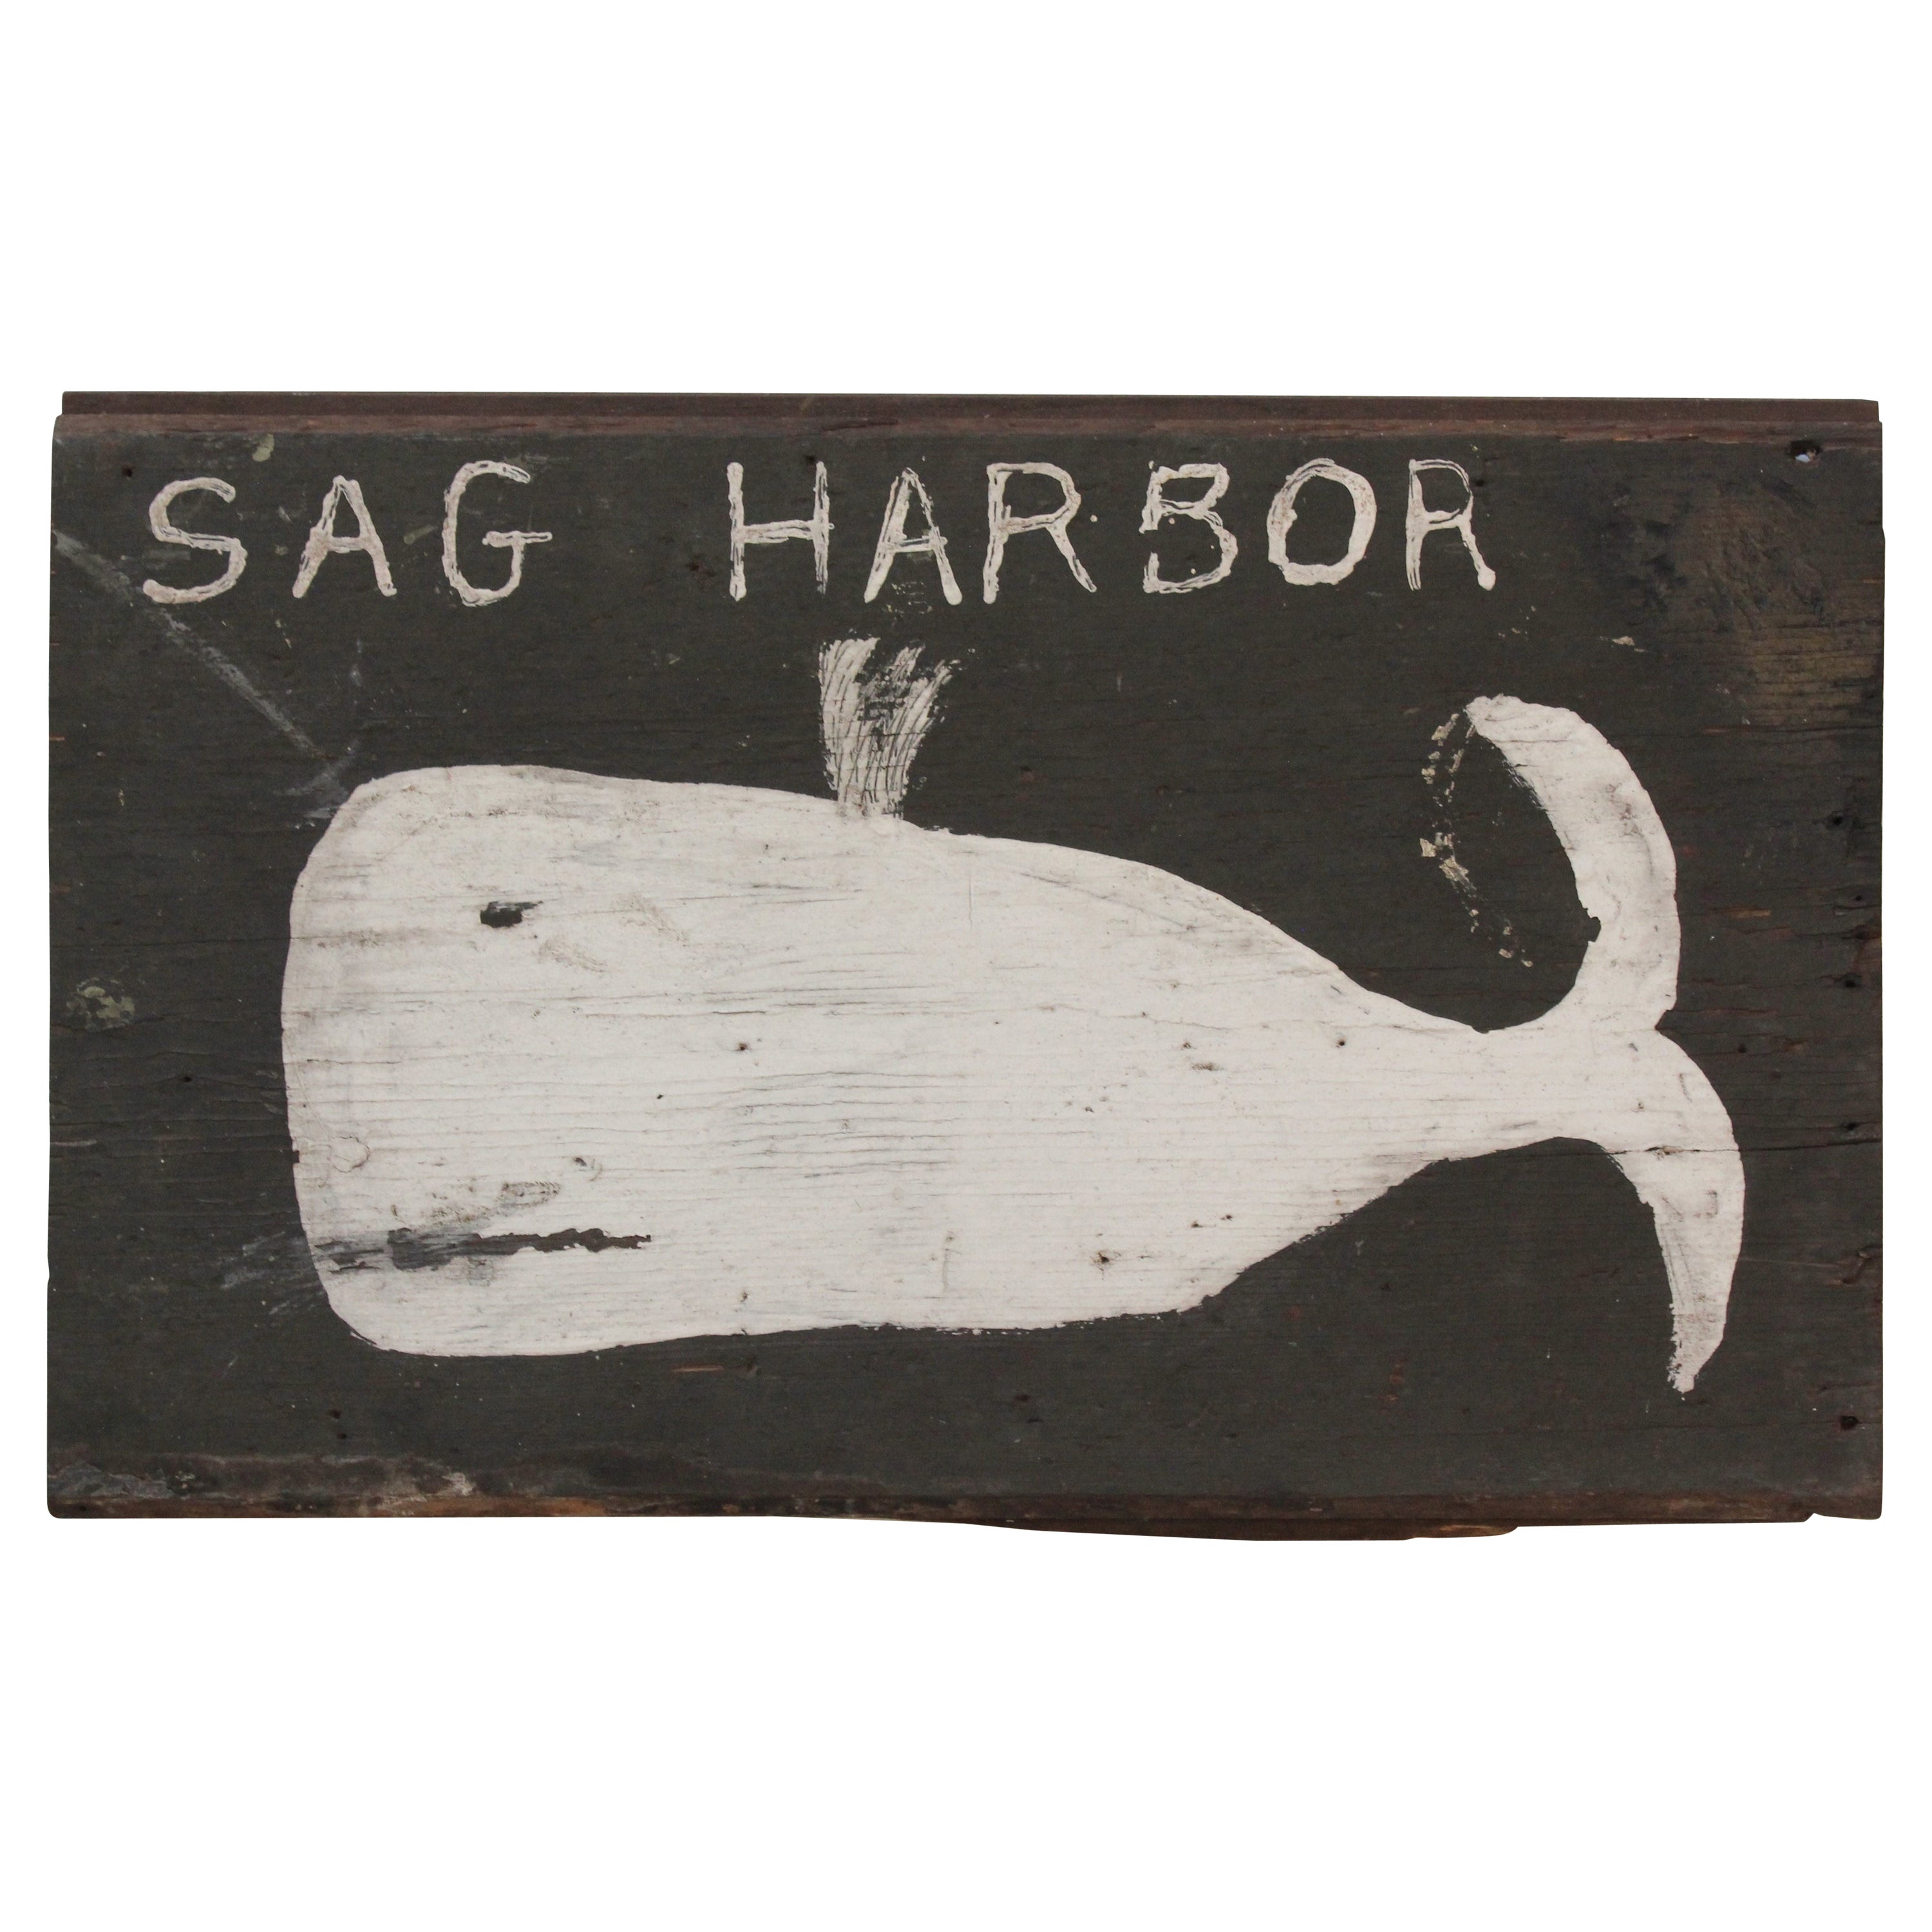 Vintage Folk Art Hand-Made Carved and Painted Sag Harbor "Whale" Sign